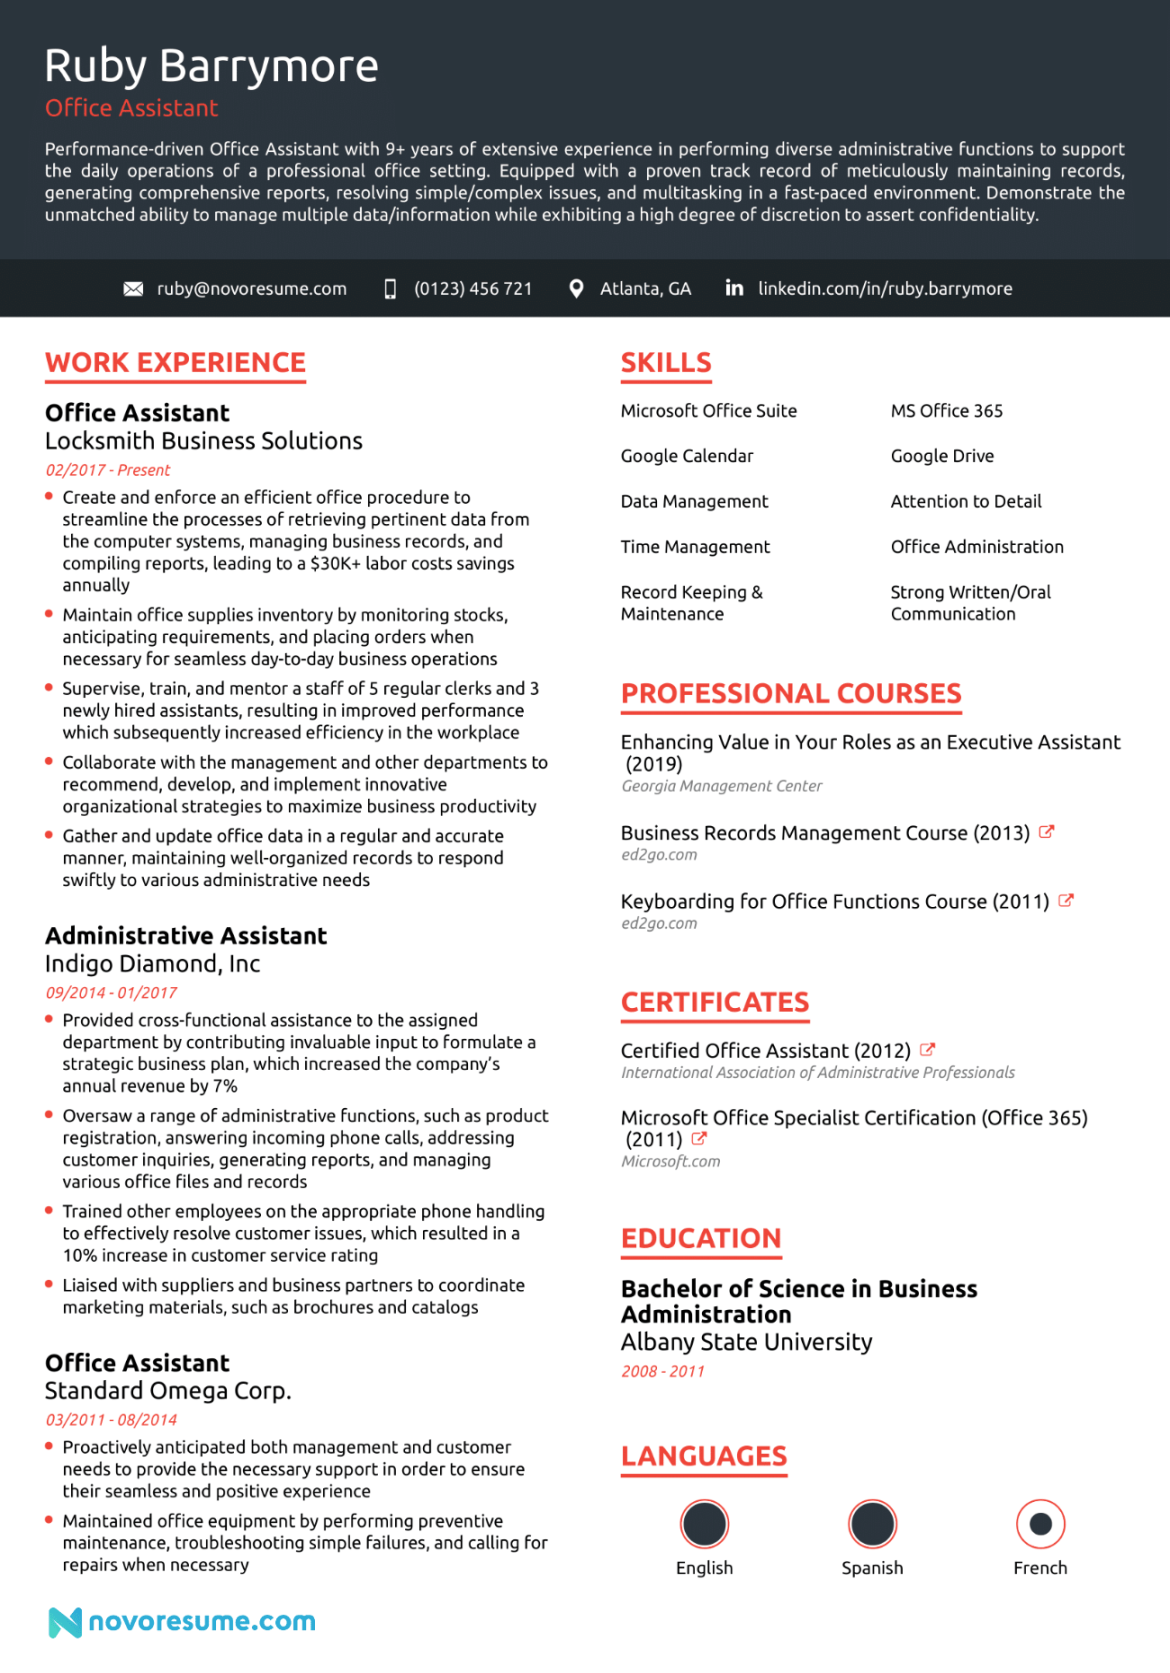 Office Assistant Resume Sample + How-to Guide for